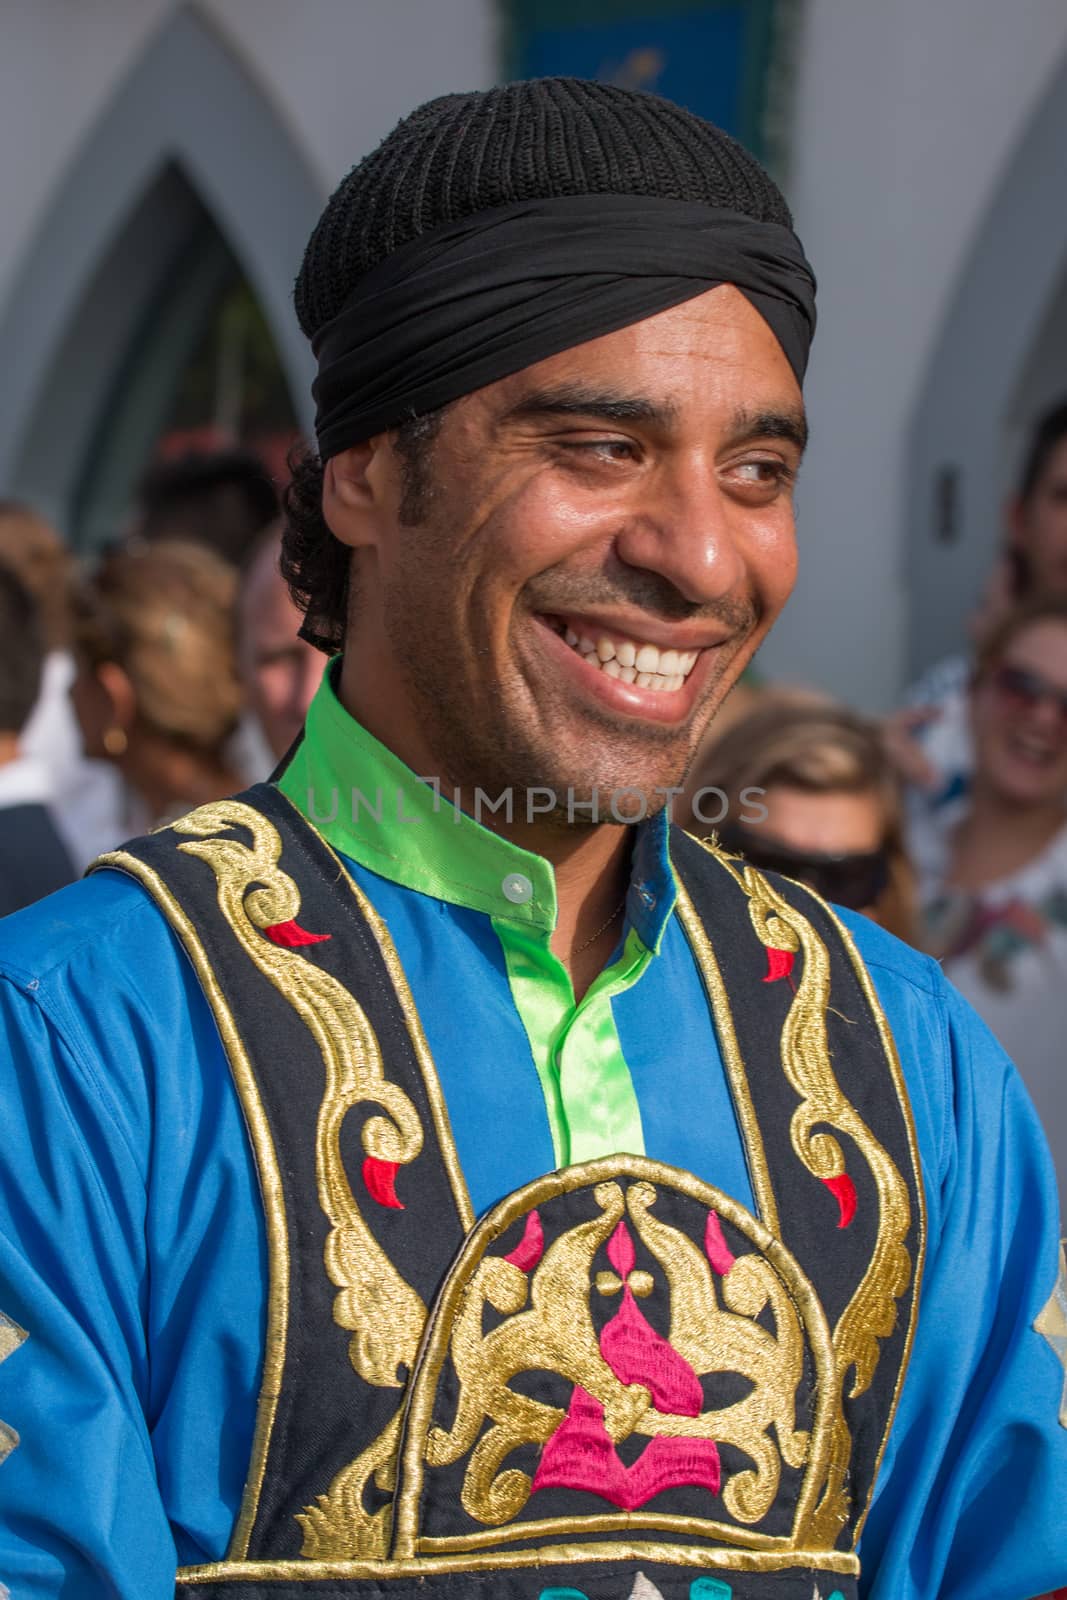 CASTRO MARIM, PORTUGAL - AUGUST 30: View of people, characters, mood, colors and street performers at the popular medieval fair held in Castro Marim village, Portugal on august.